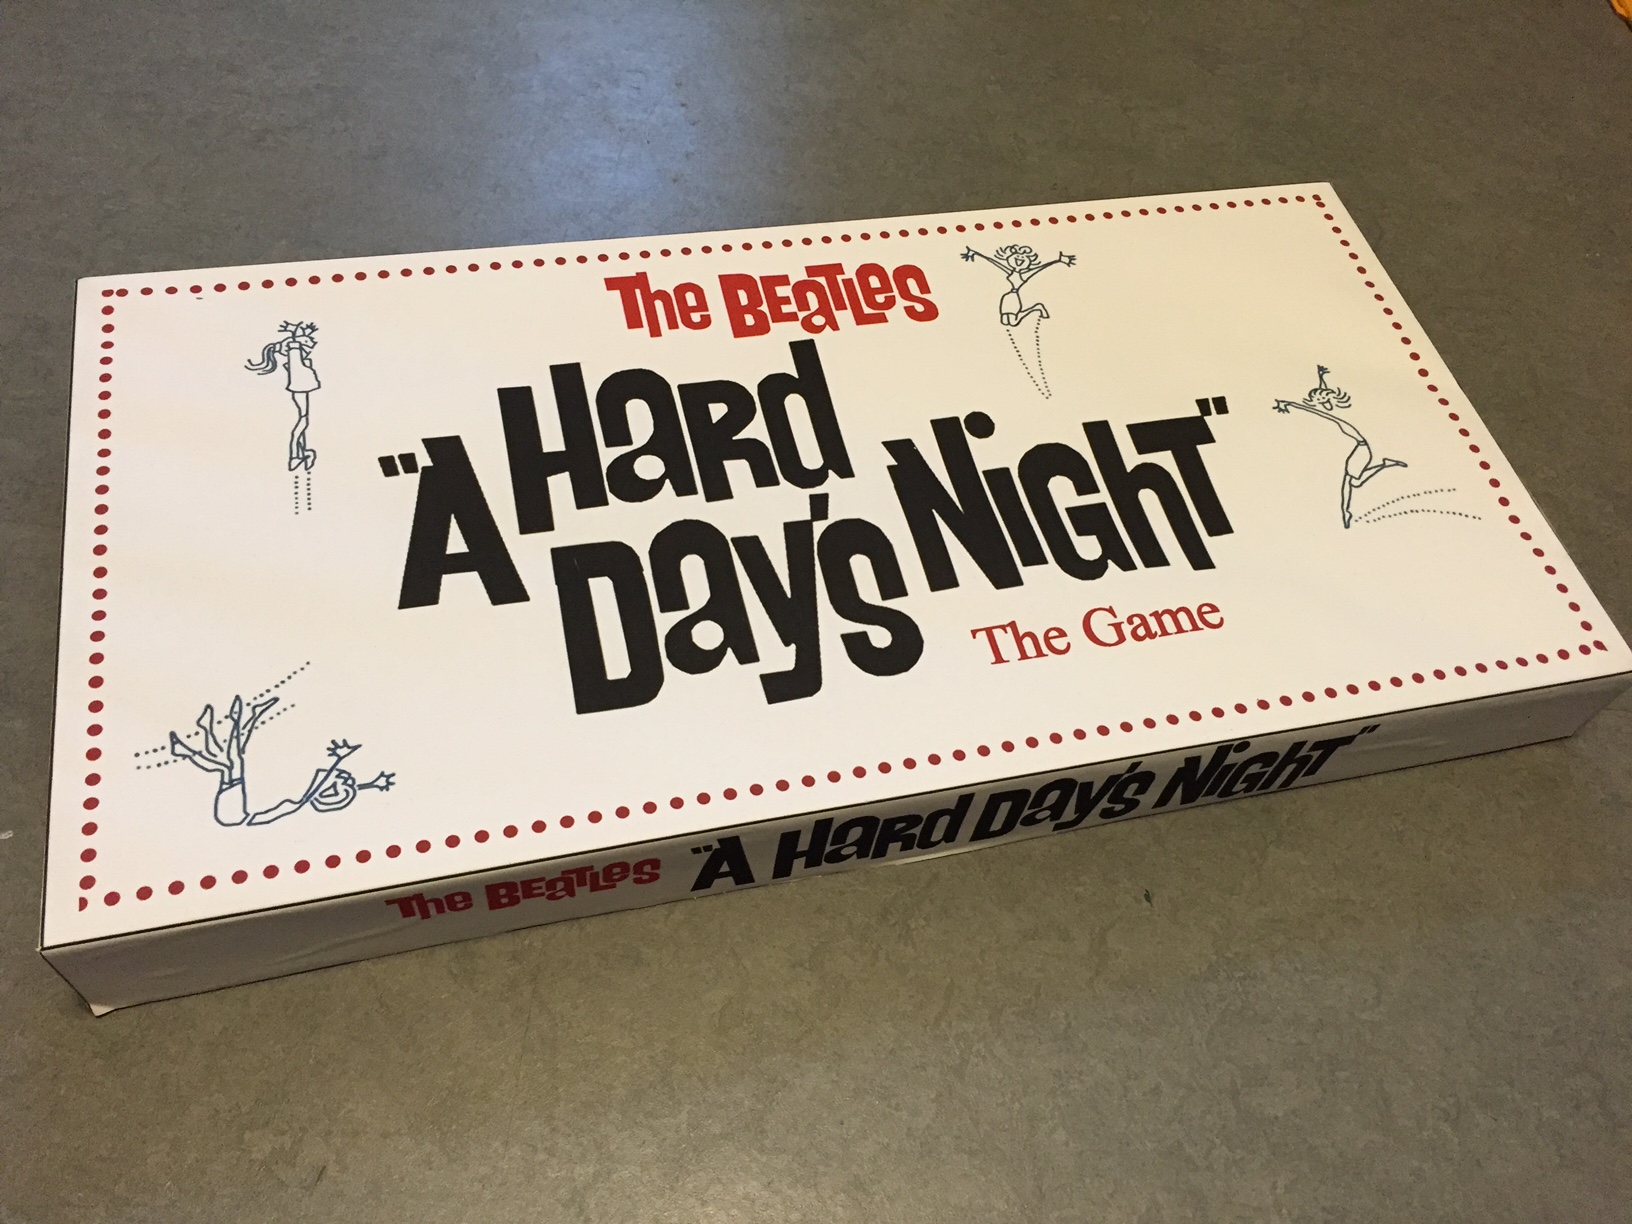 A Hard Day’s Night Beatles board game (book project)